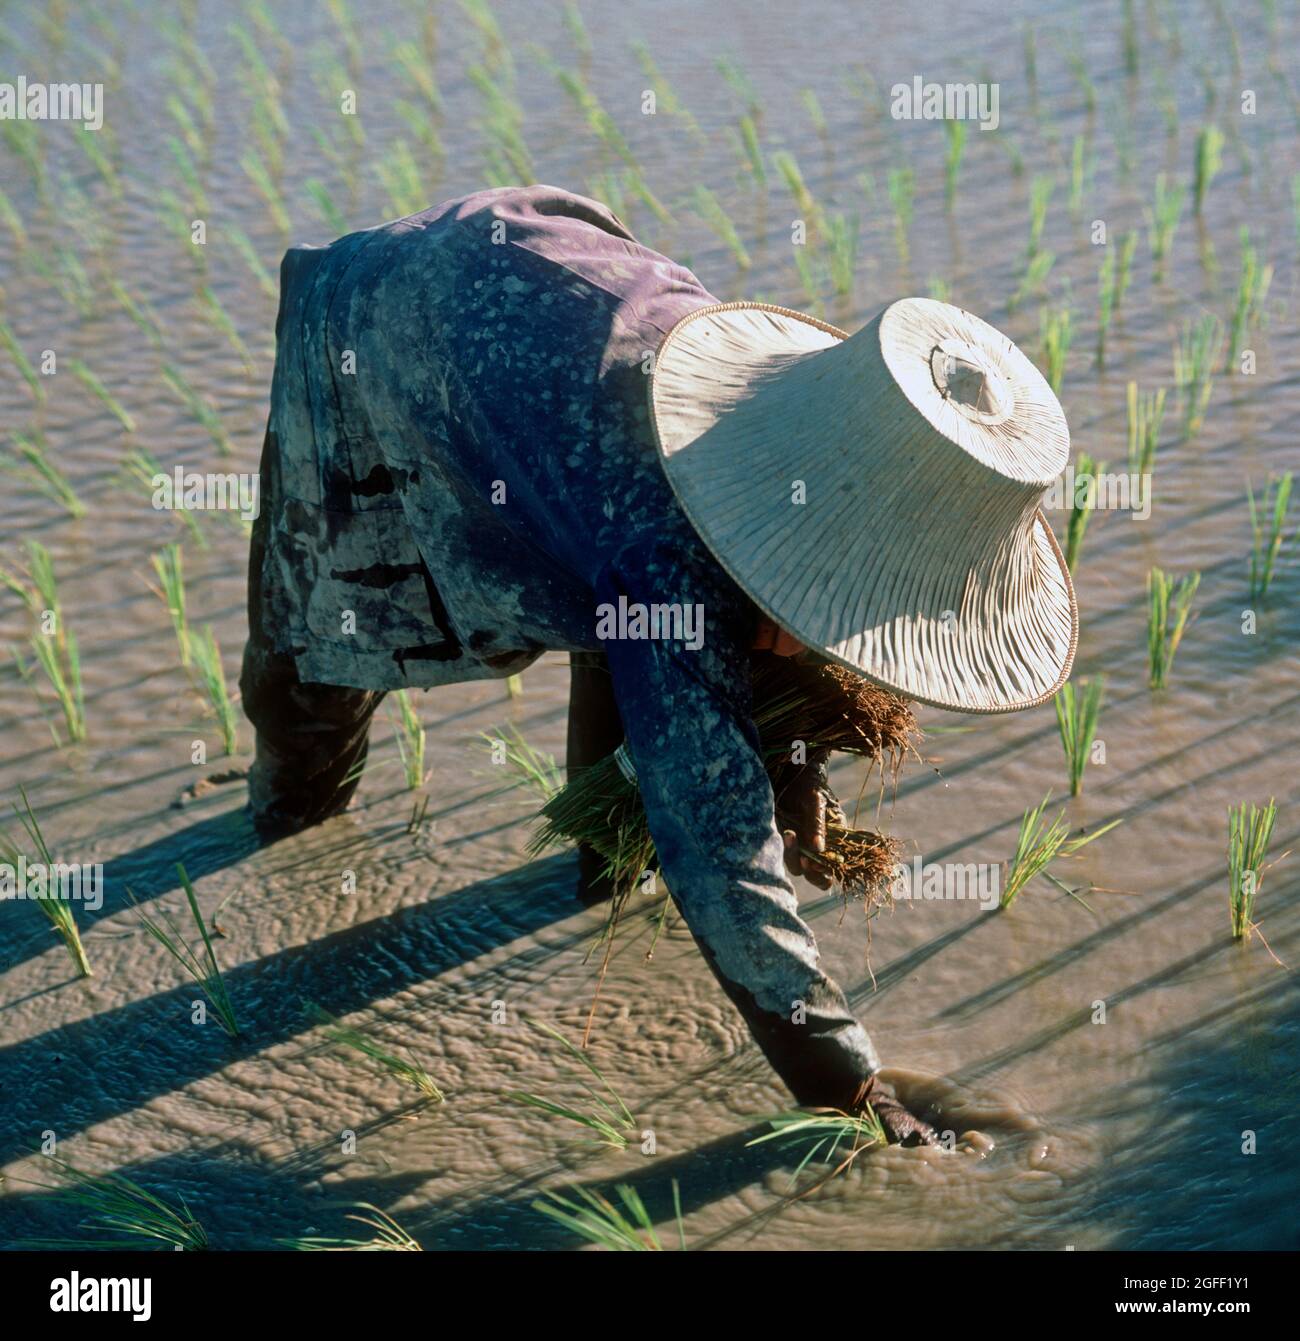 Girl transplanting rice seedlings from seedling beds into rows in paddy rice water in evening light, Northern Thailand Stock Photo